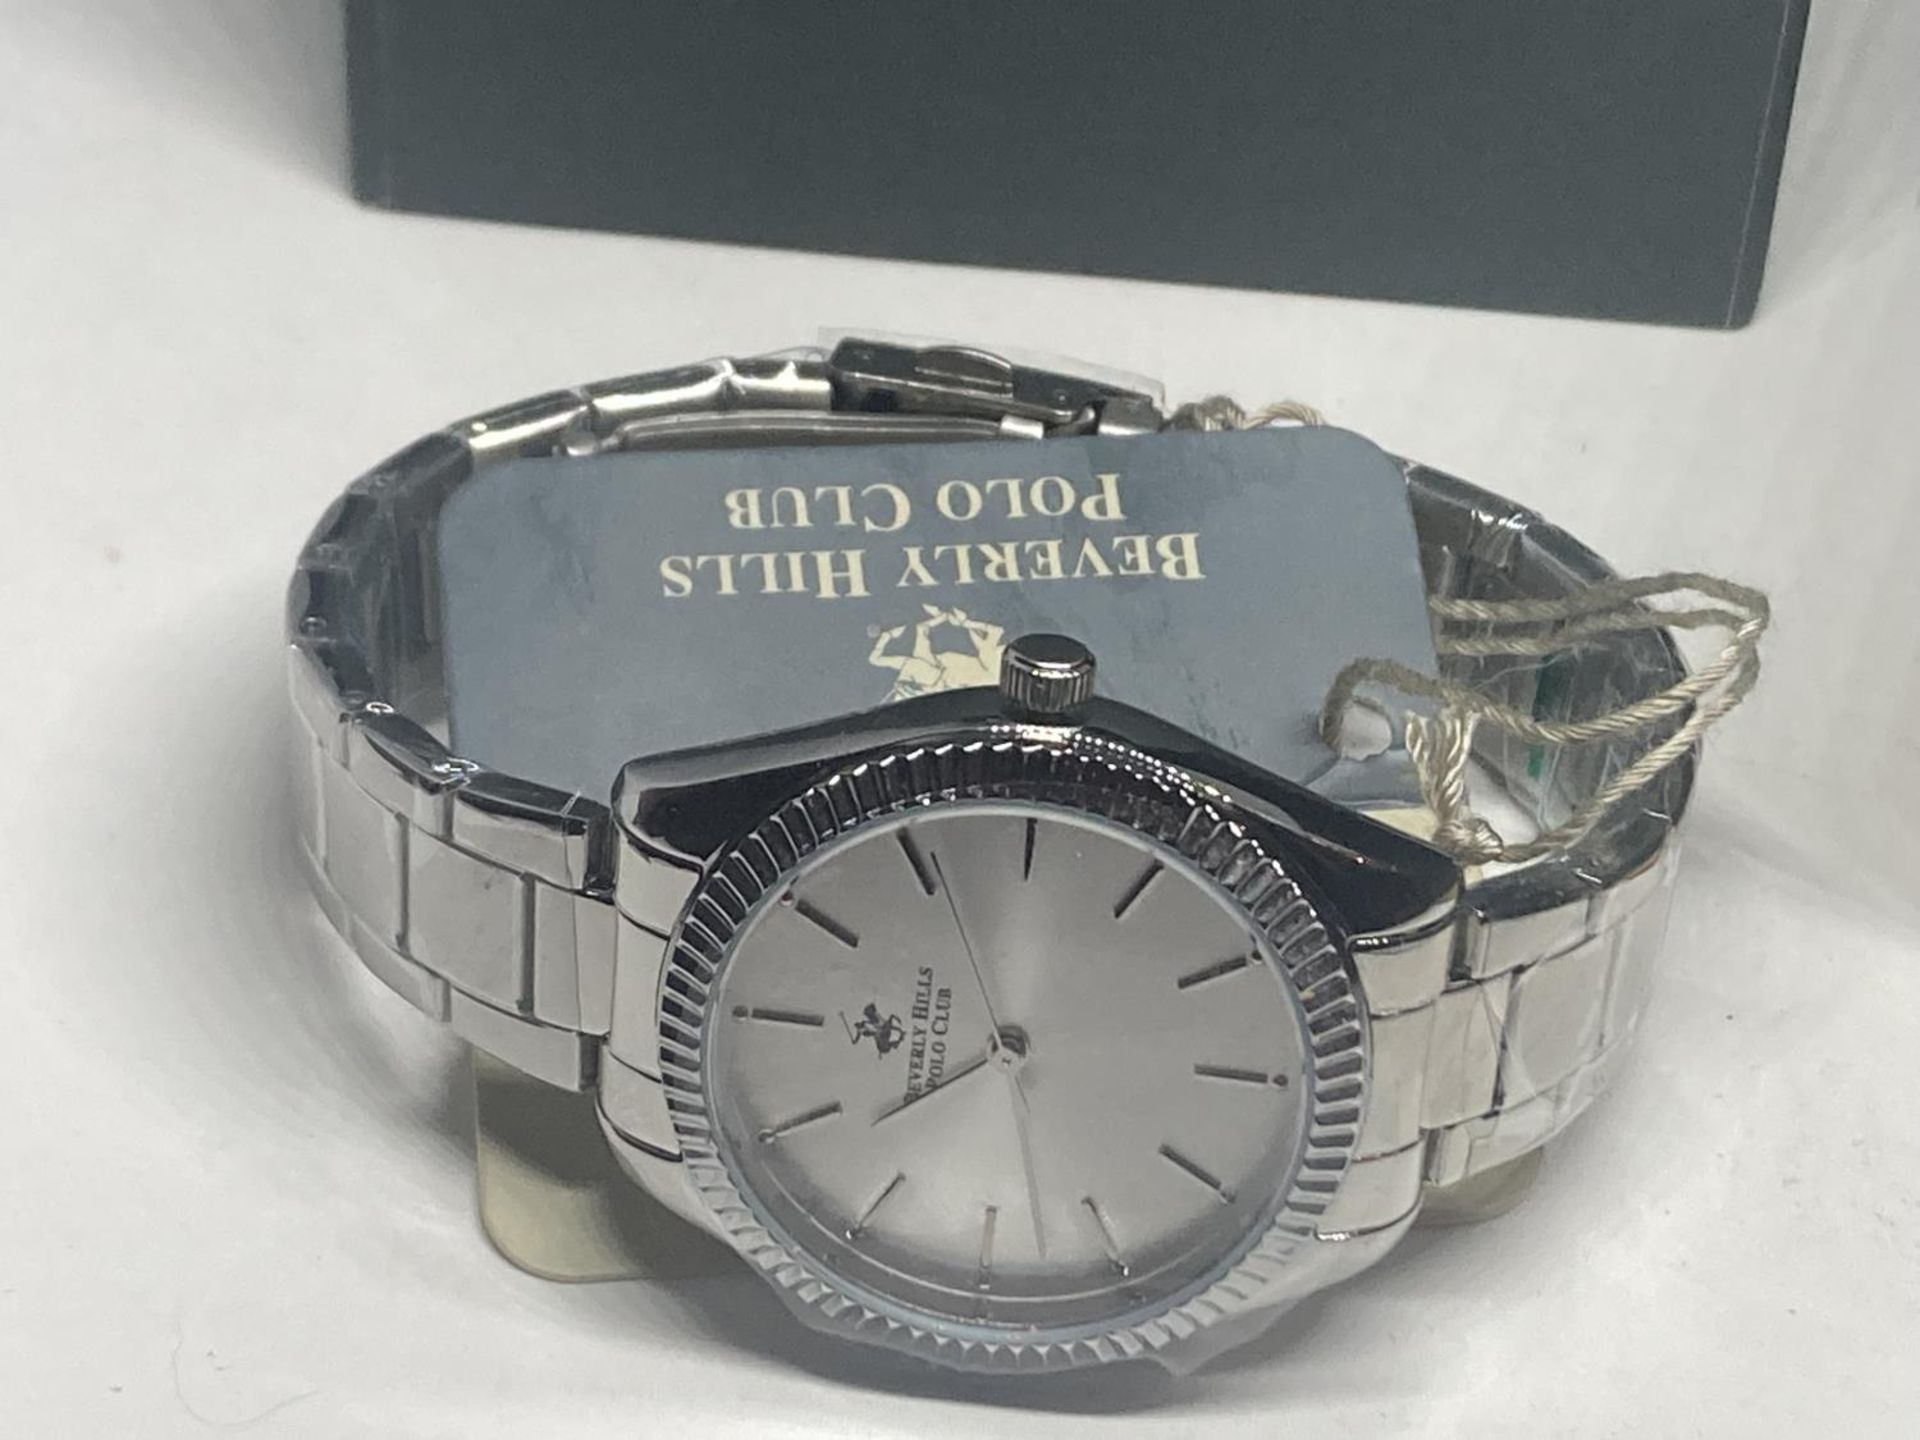 AN AS NEW AND BOXED BEVERLEY HILLS POLO CLUB WRIST WATCH SEEN WORKING BUT NO WARRANTY - Image 9 of 10